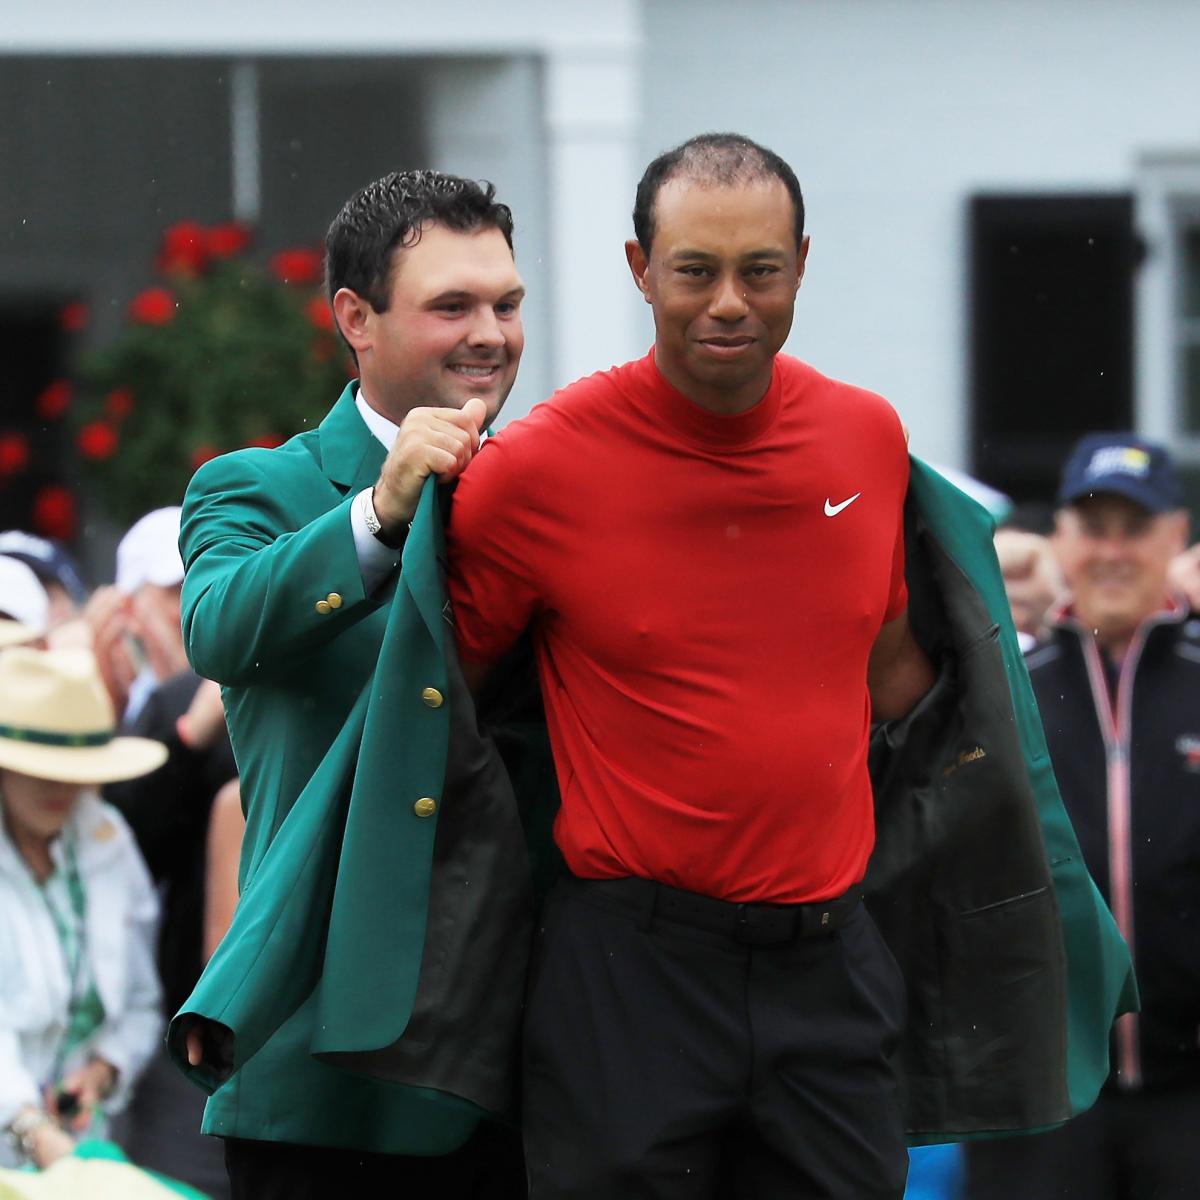 Tiger Woods Tweets 'This Jacket Sure Is Comfortable' After 2019 Masters ...